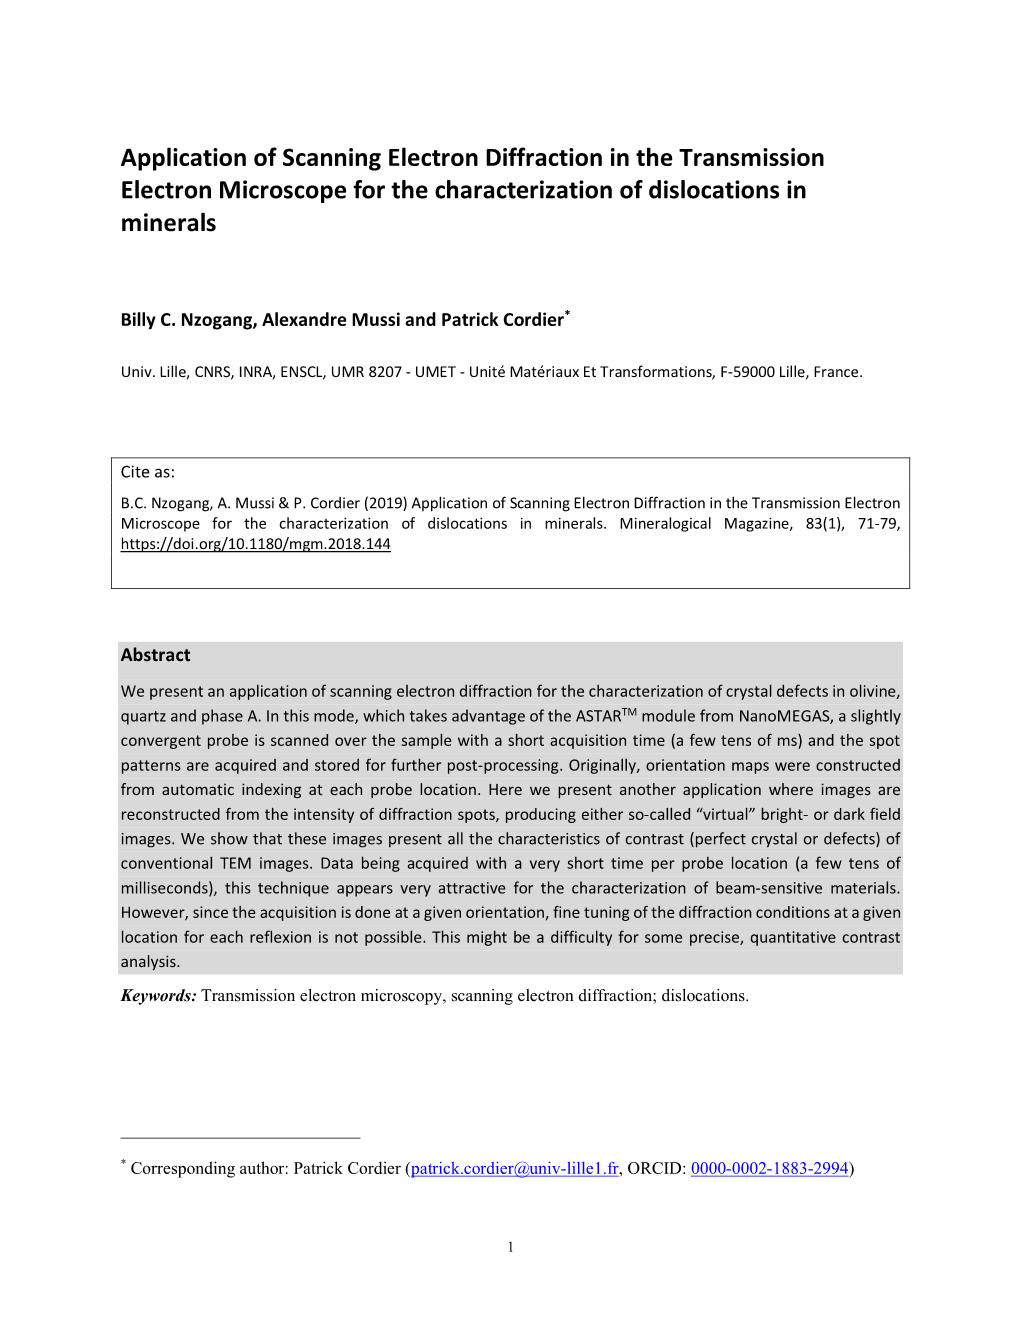 Application of Scanning Electron Diffraction in the Transmission Electron Microscope for the Characterization of Dislocations in Minerals